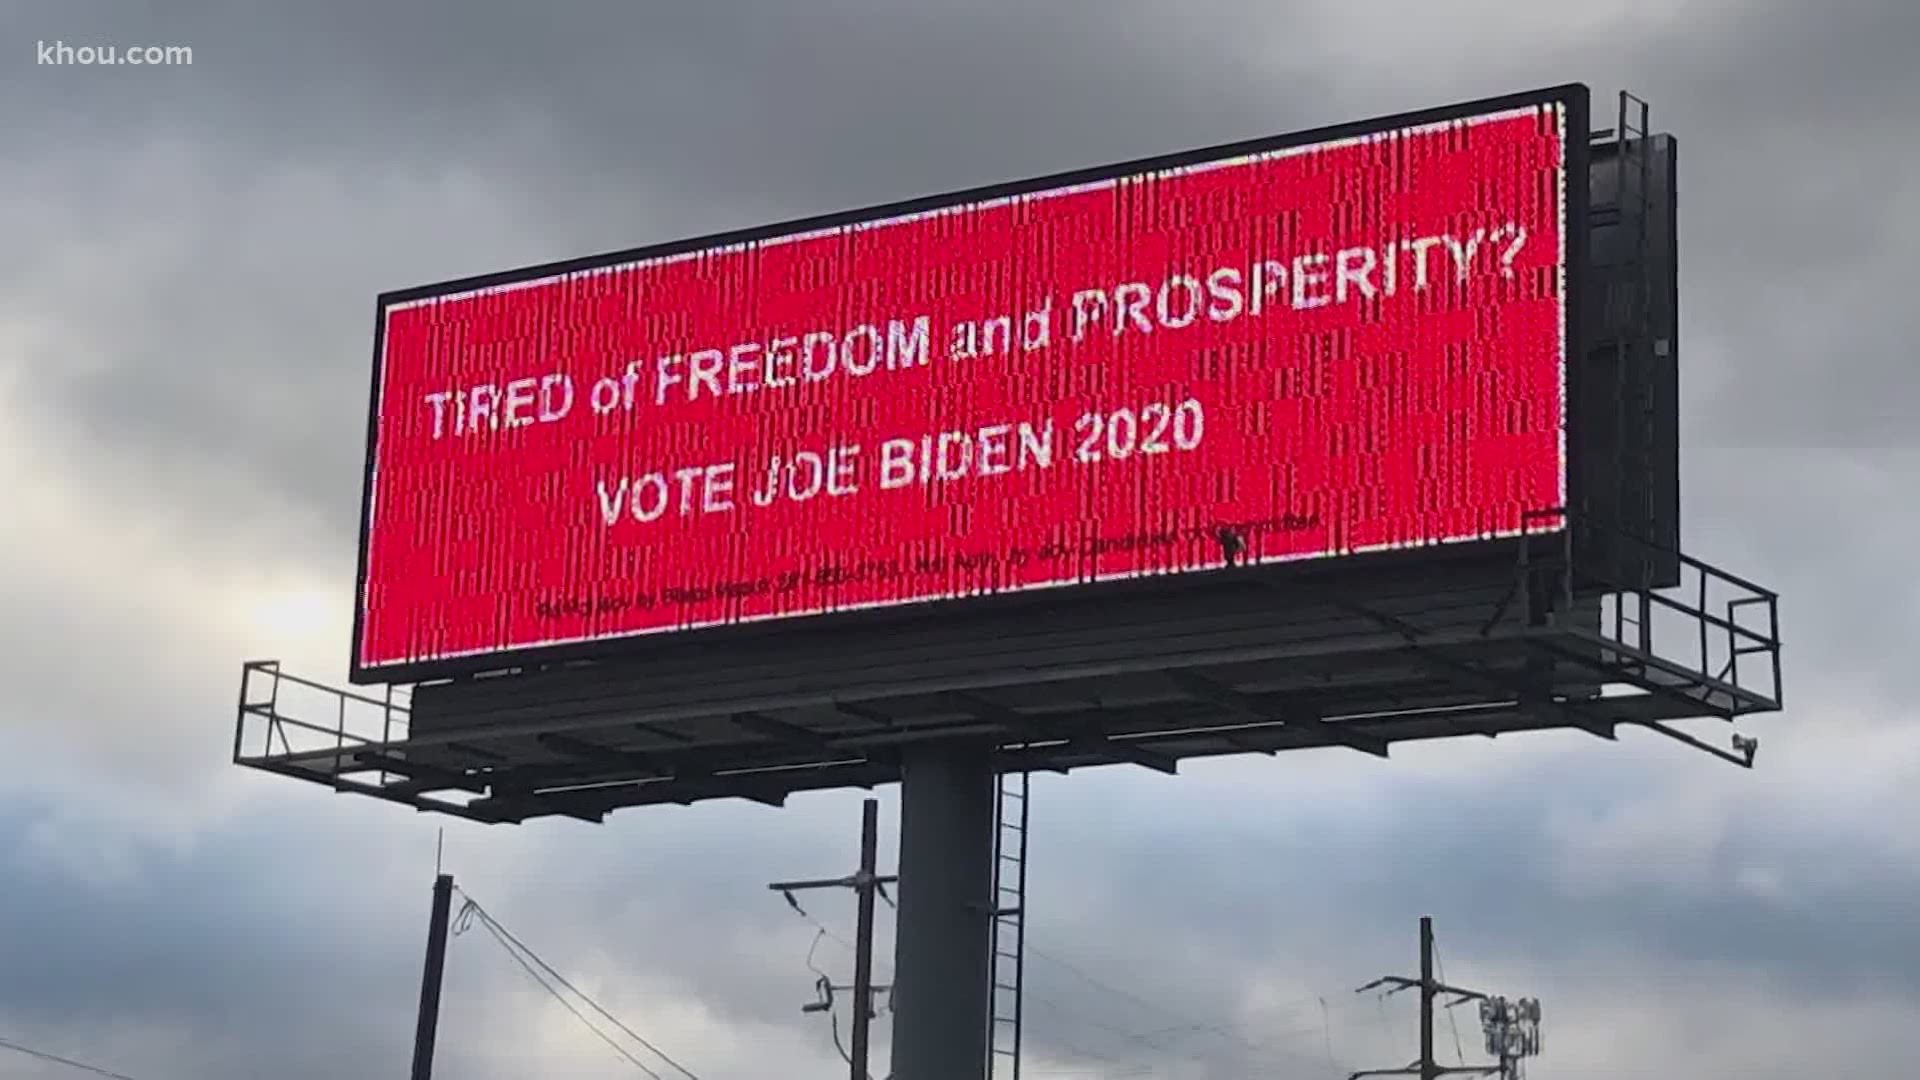 The ad was pulled from the digital display in Conroe while other political ads continue to play.